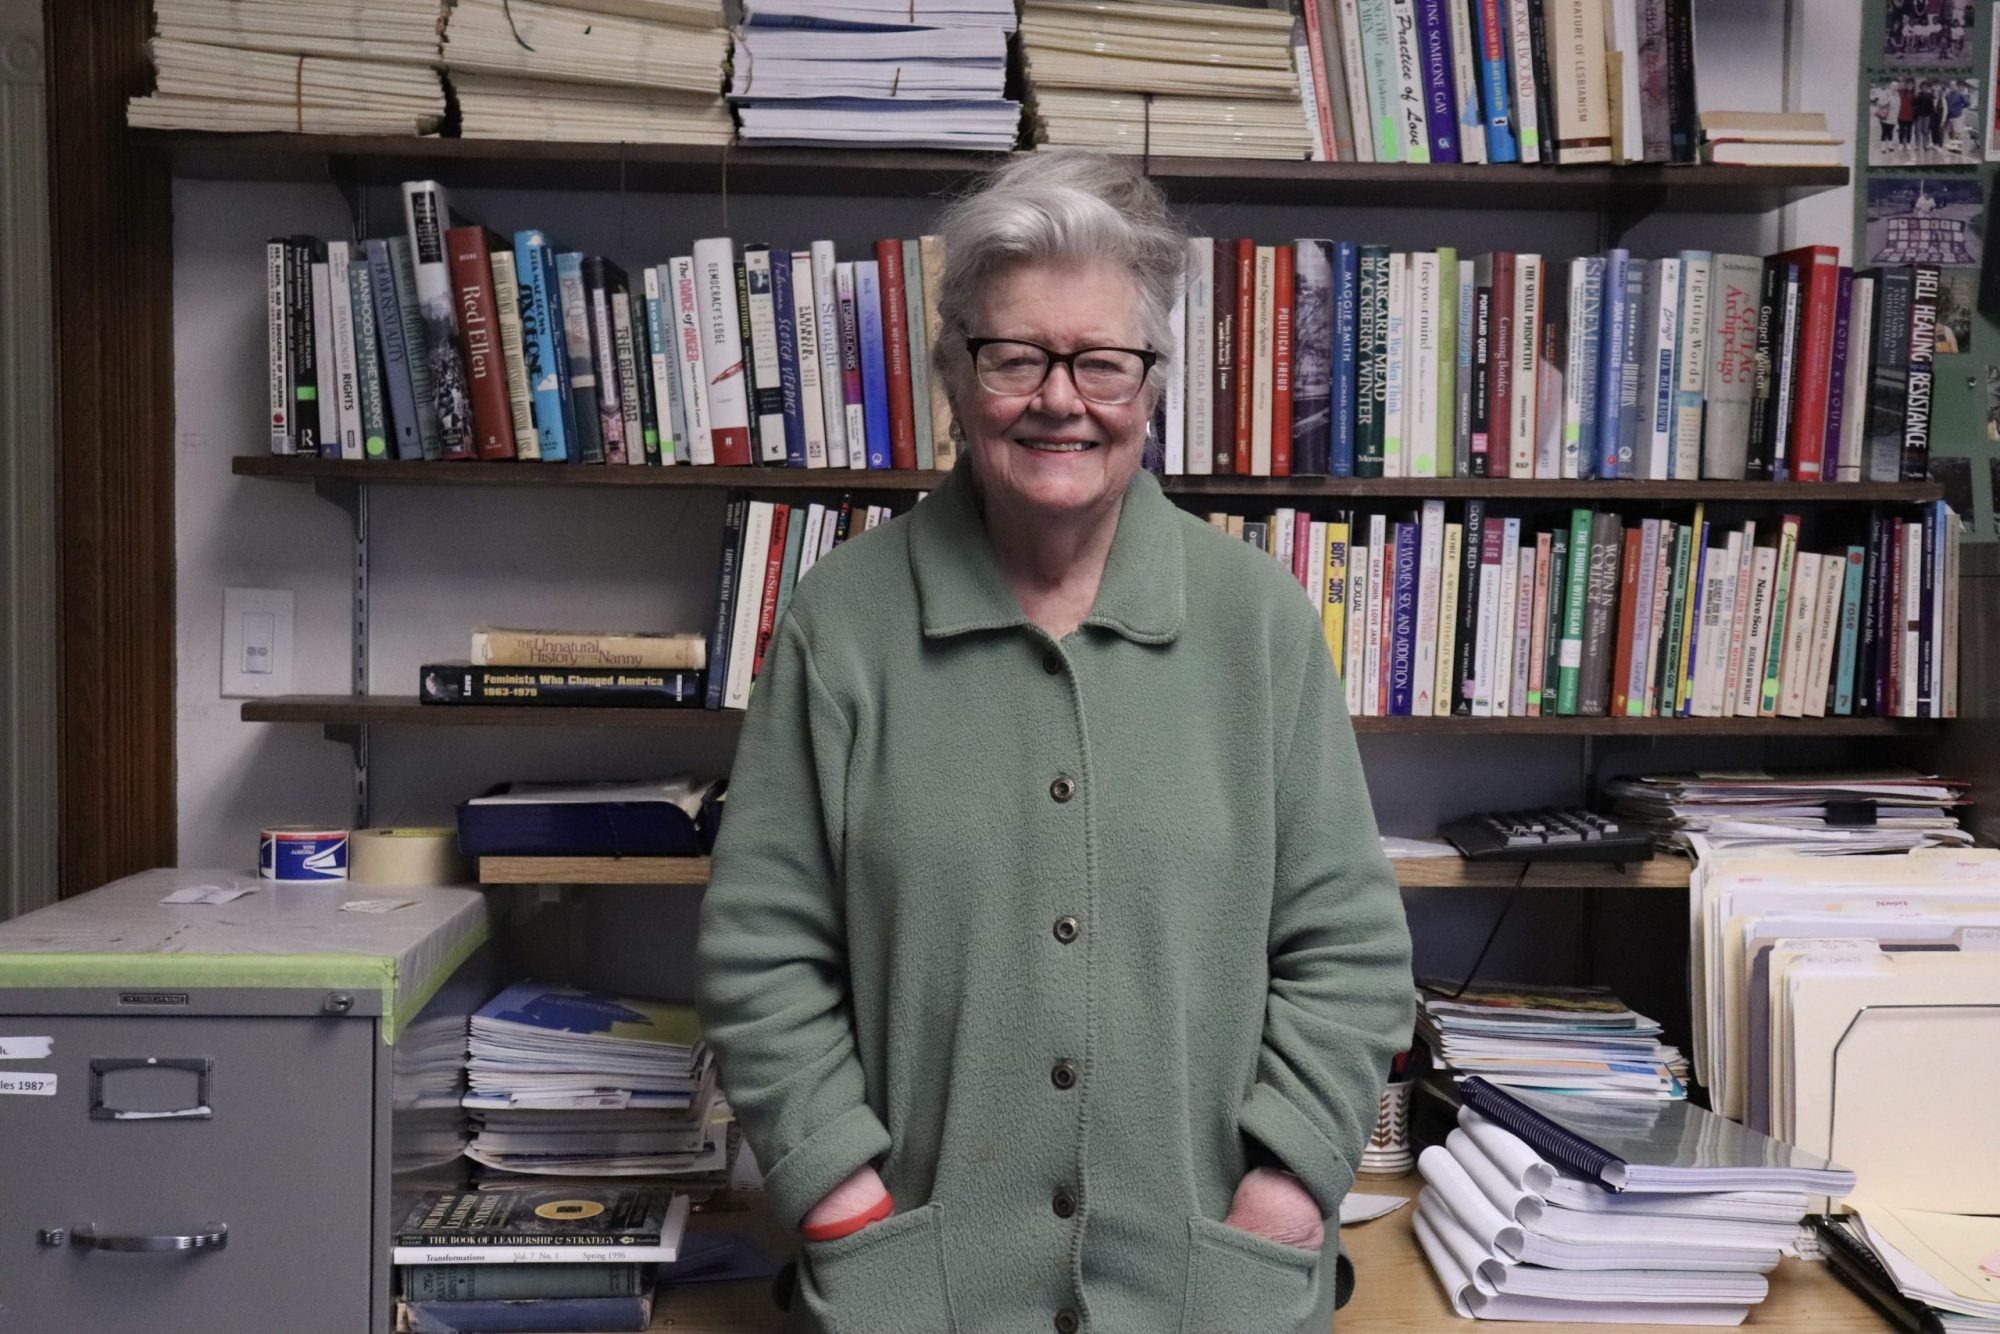 A discussion with Peggy McIntosh: The importance of reflecting on one’s privilege